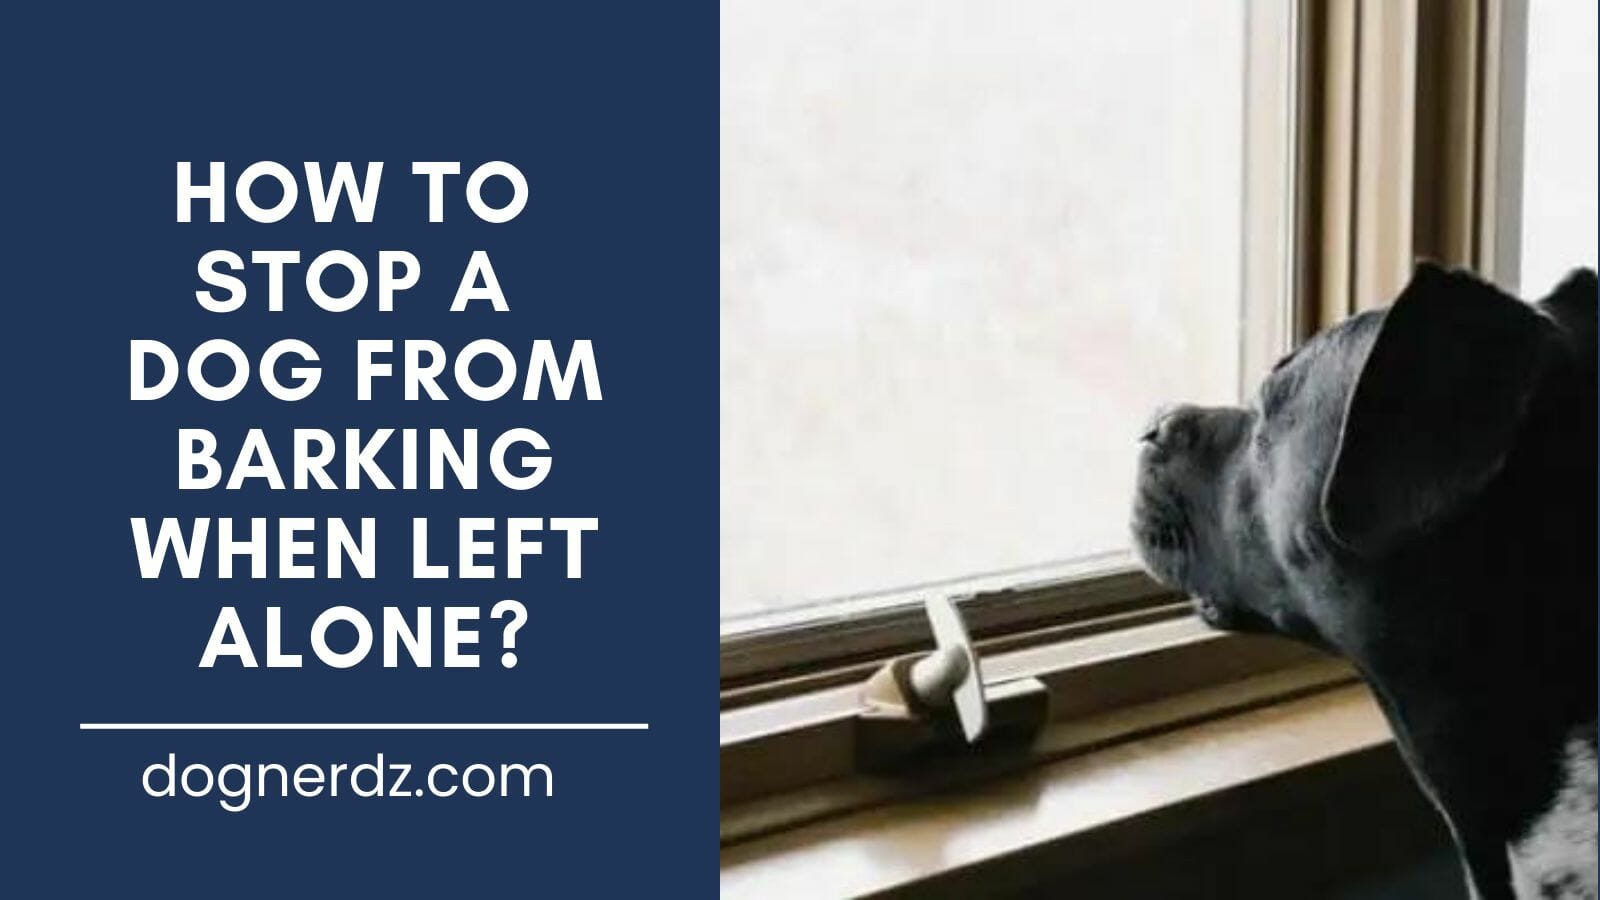 guide on how to stop a dog from barking when left alone